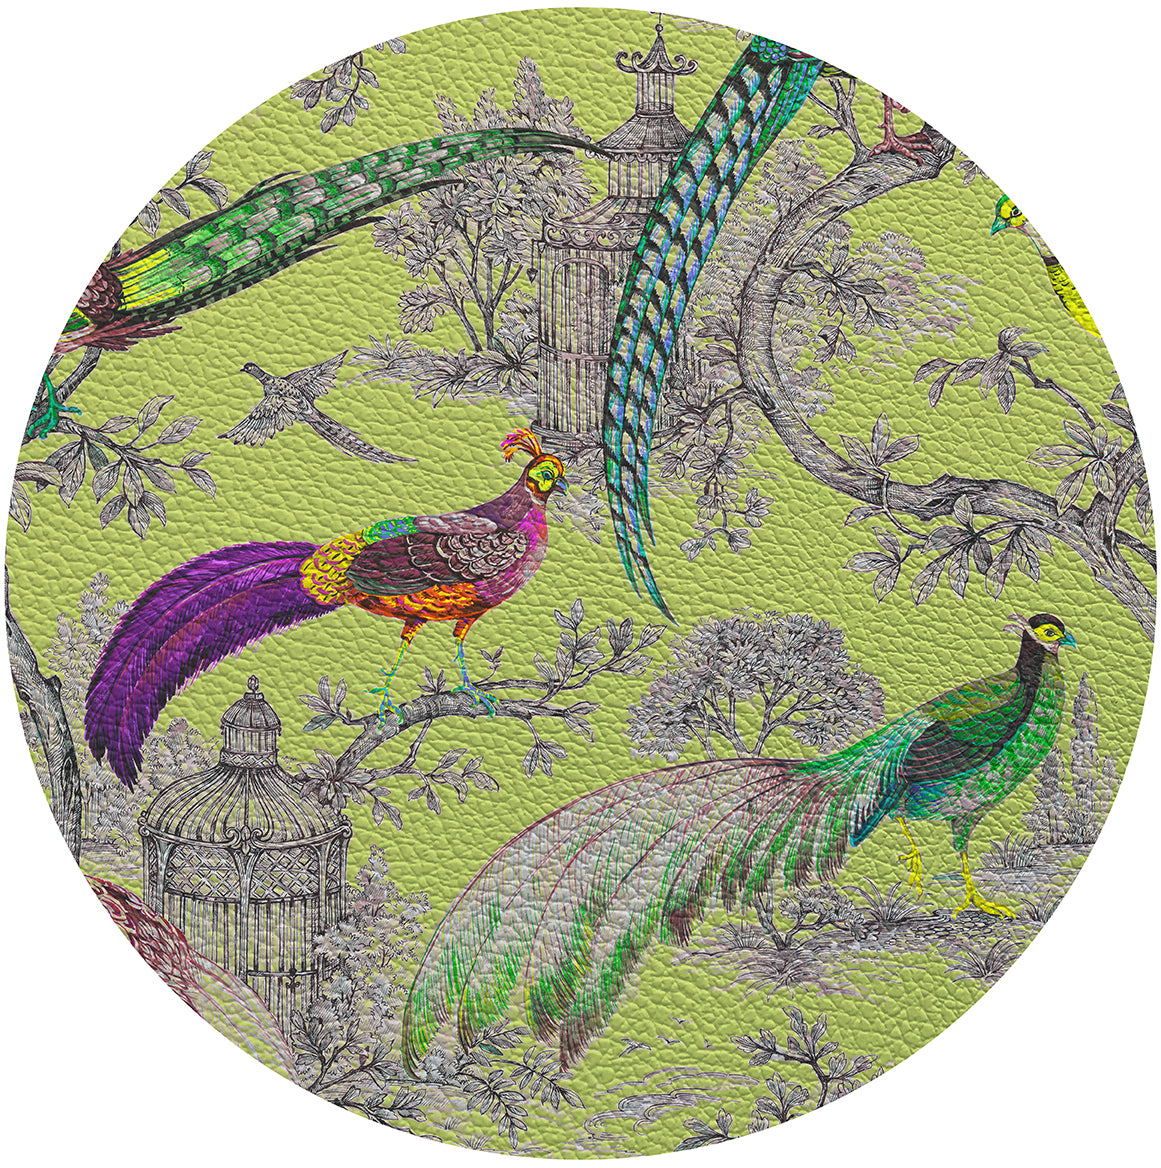 Pheasant Fall Sauvage St Germain 16" Round Pebble Placemat, Set of 4